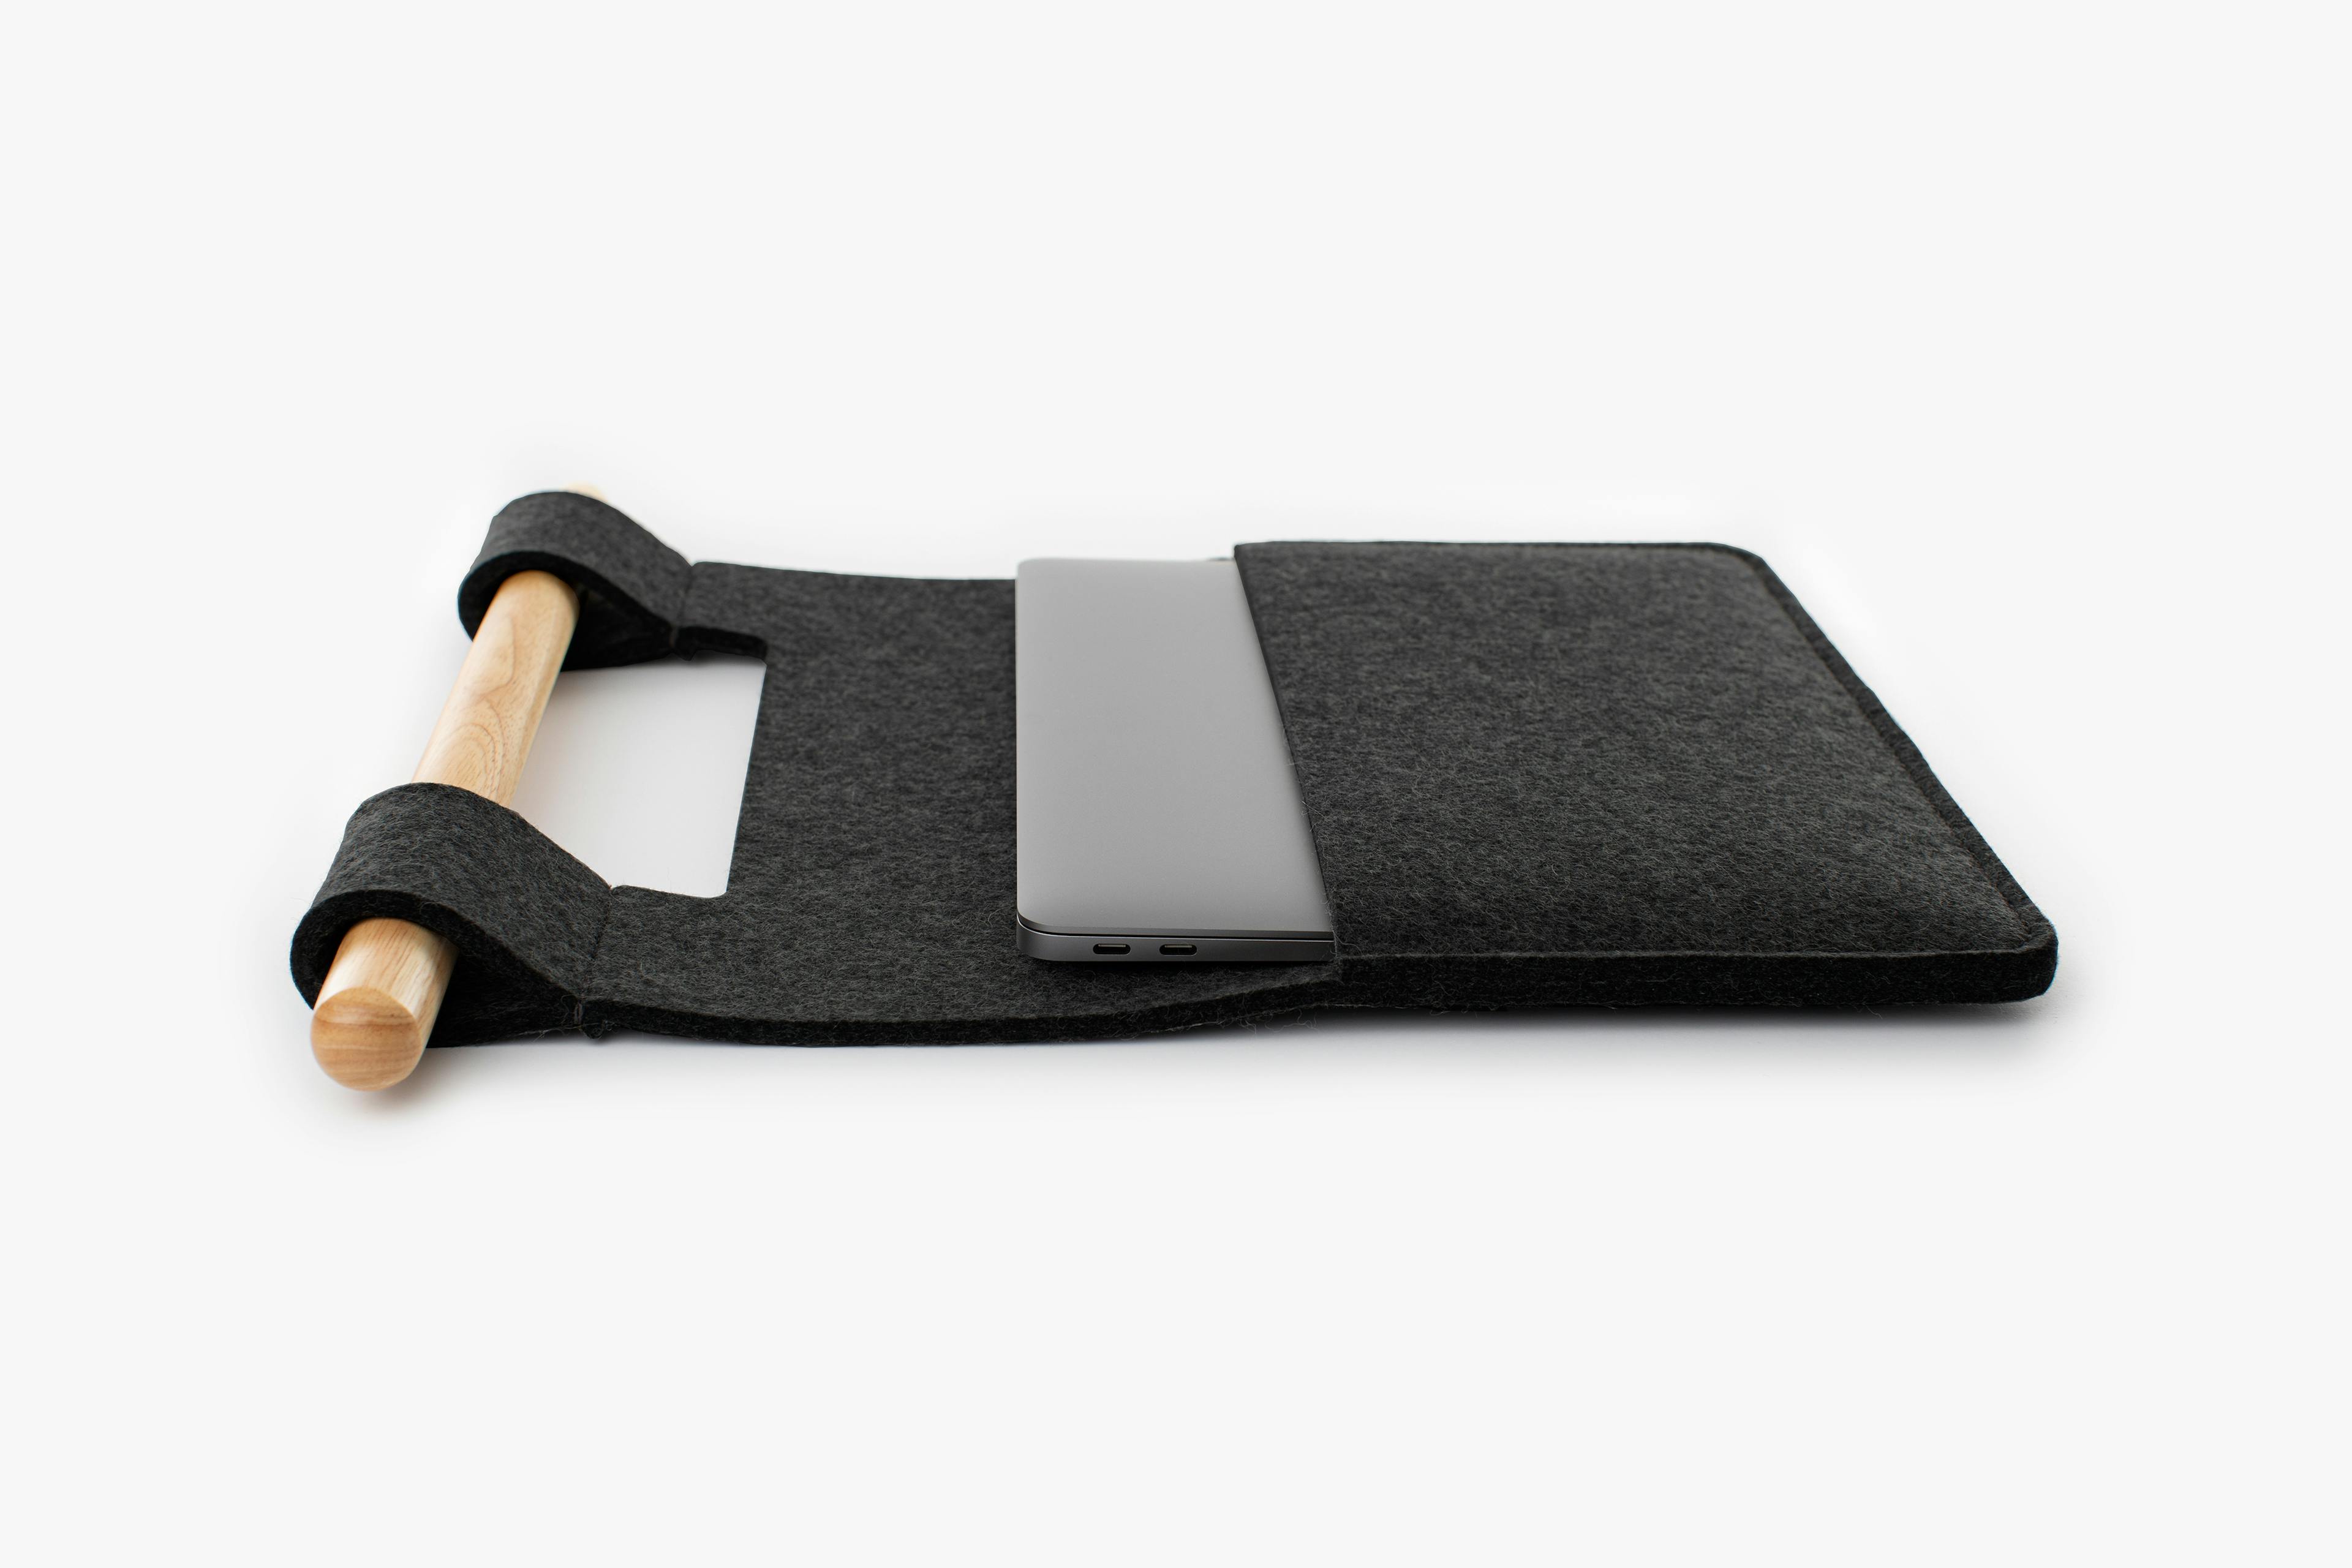 The Sleeve Product in Midnight Color with Laptop on Top